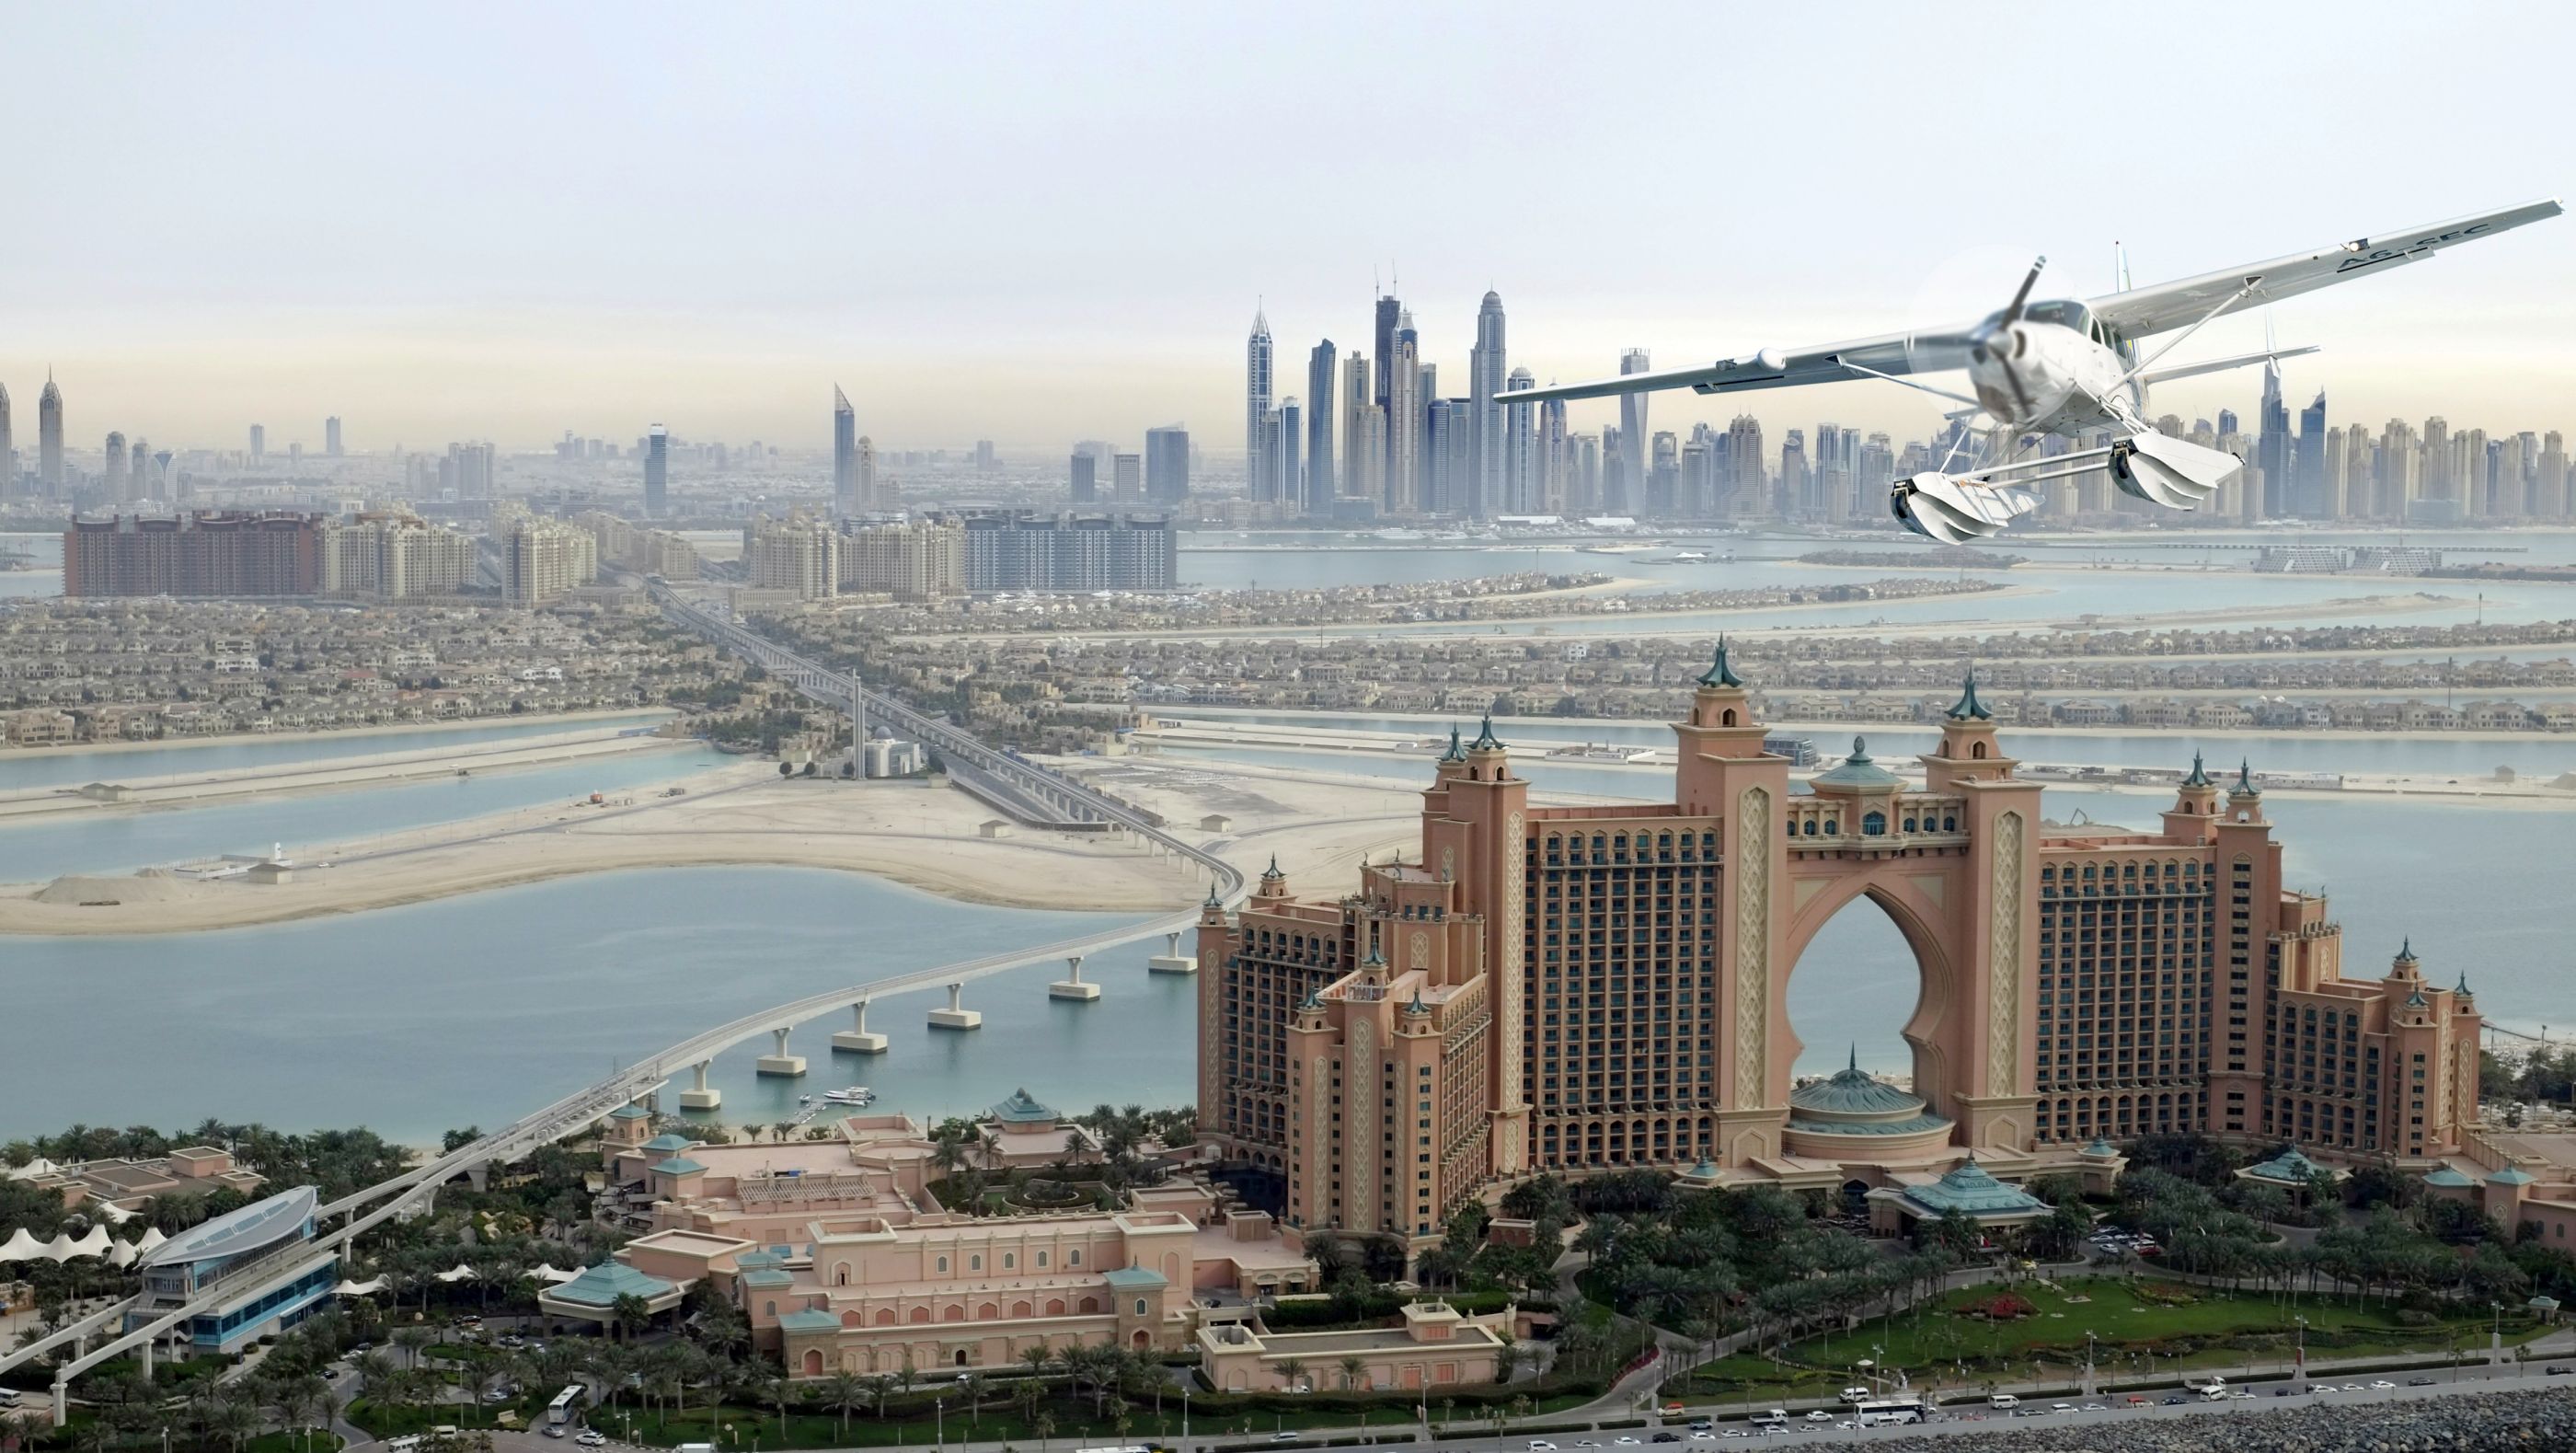 View over the Dubai from a seaplane